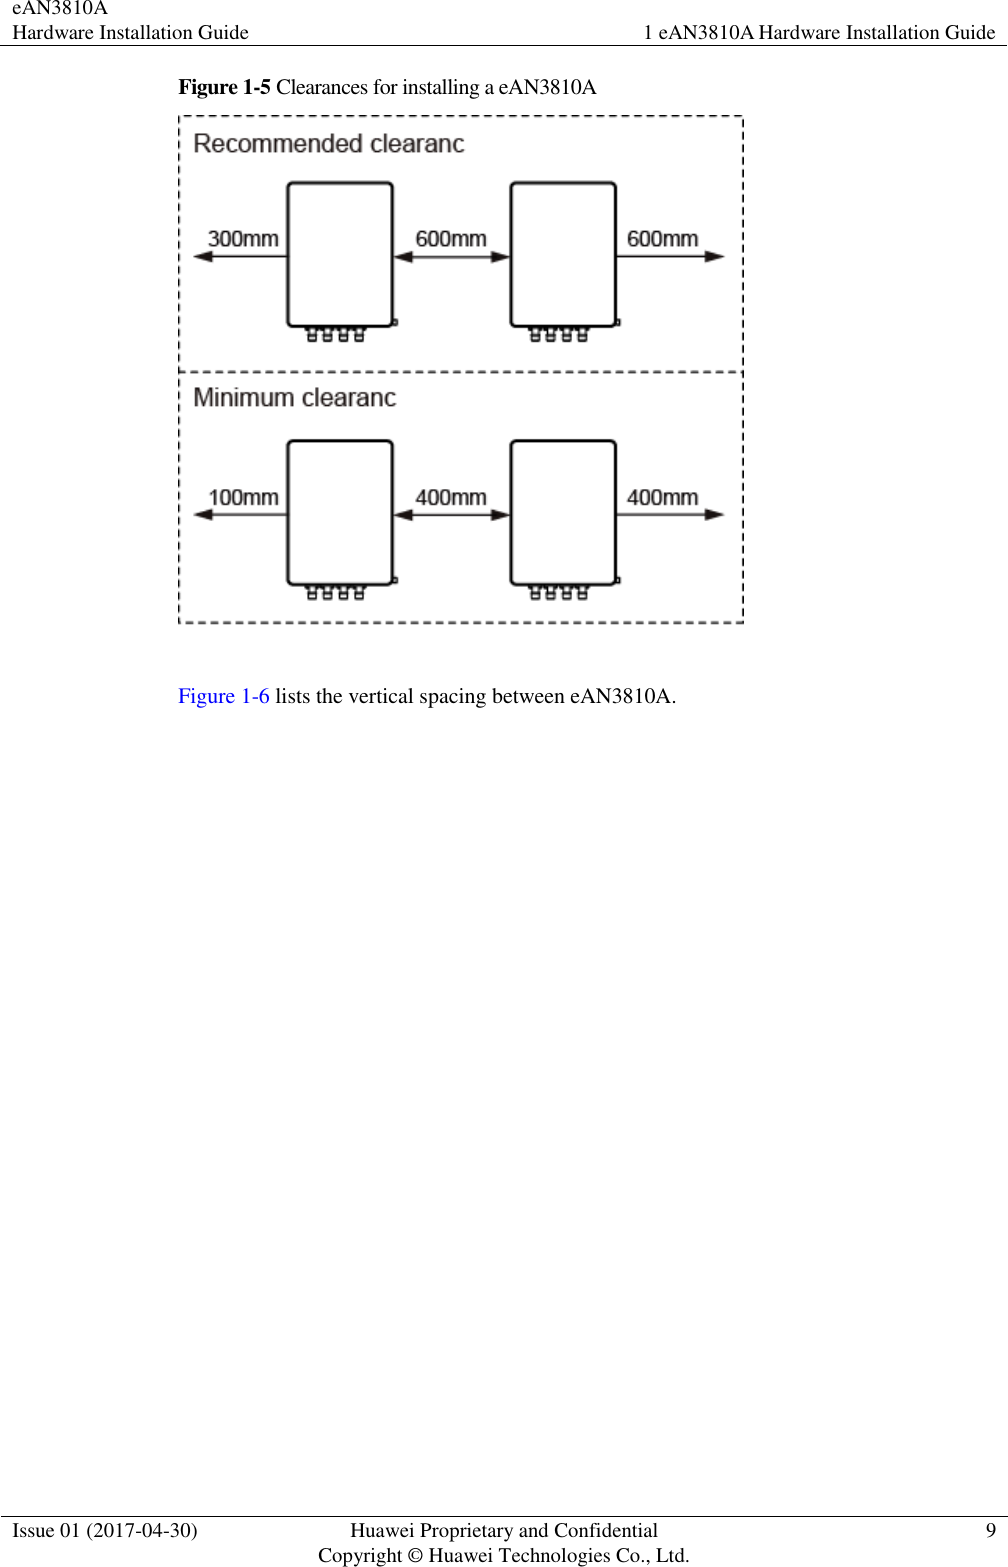 eAN3810A   Hardware Installation Guide 1 eAN3810A Hardware Installation Guide  Issue 01 (2017-04-30) Huawei Proprietary and Confidential                                     Copyright © Huawei Technologies Co., Ltd. 9  Figure 1-5 Clearances for installing a eAN3810A   Figure 1-6 lists the vertical spacing between eAN3810A. 